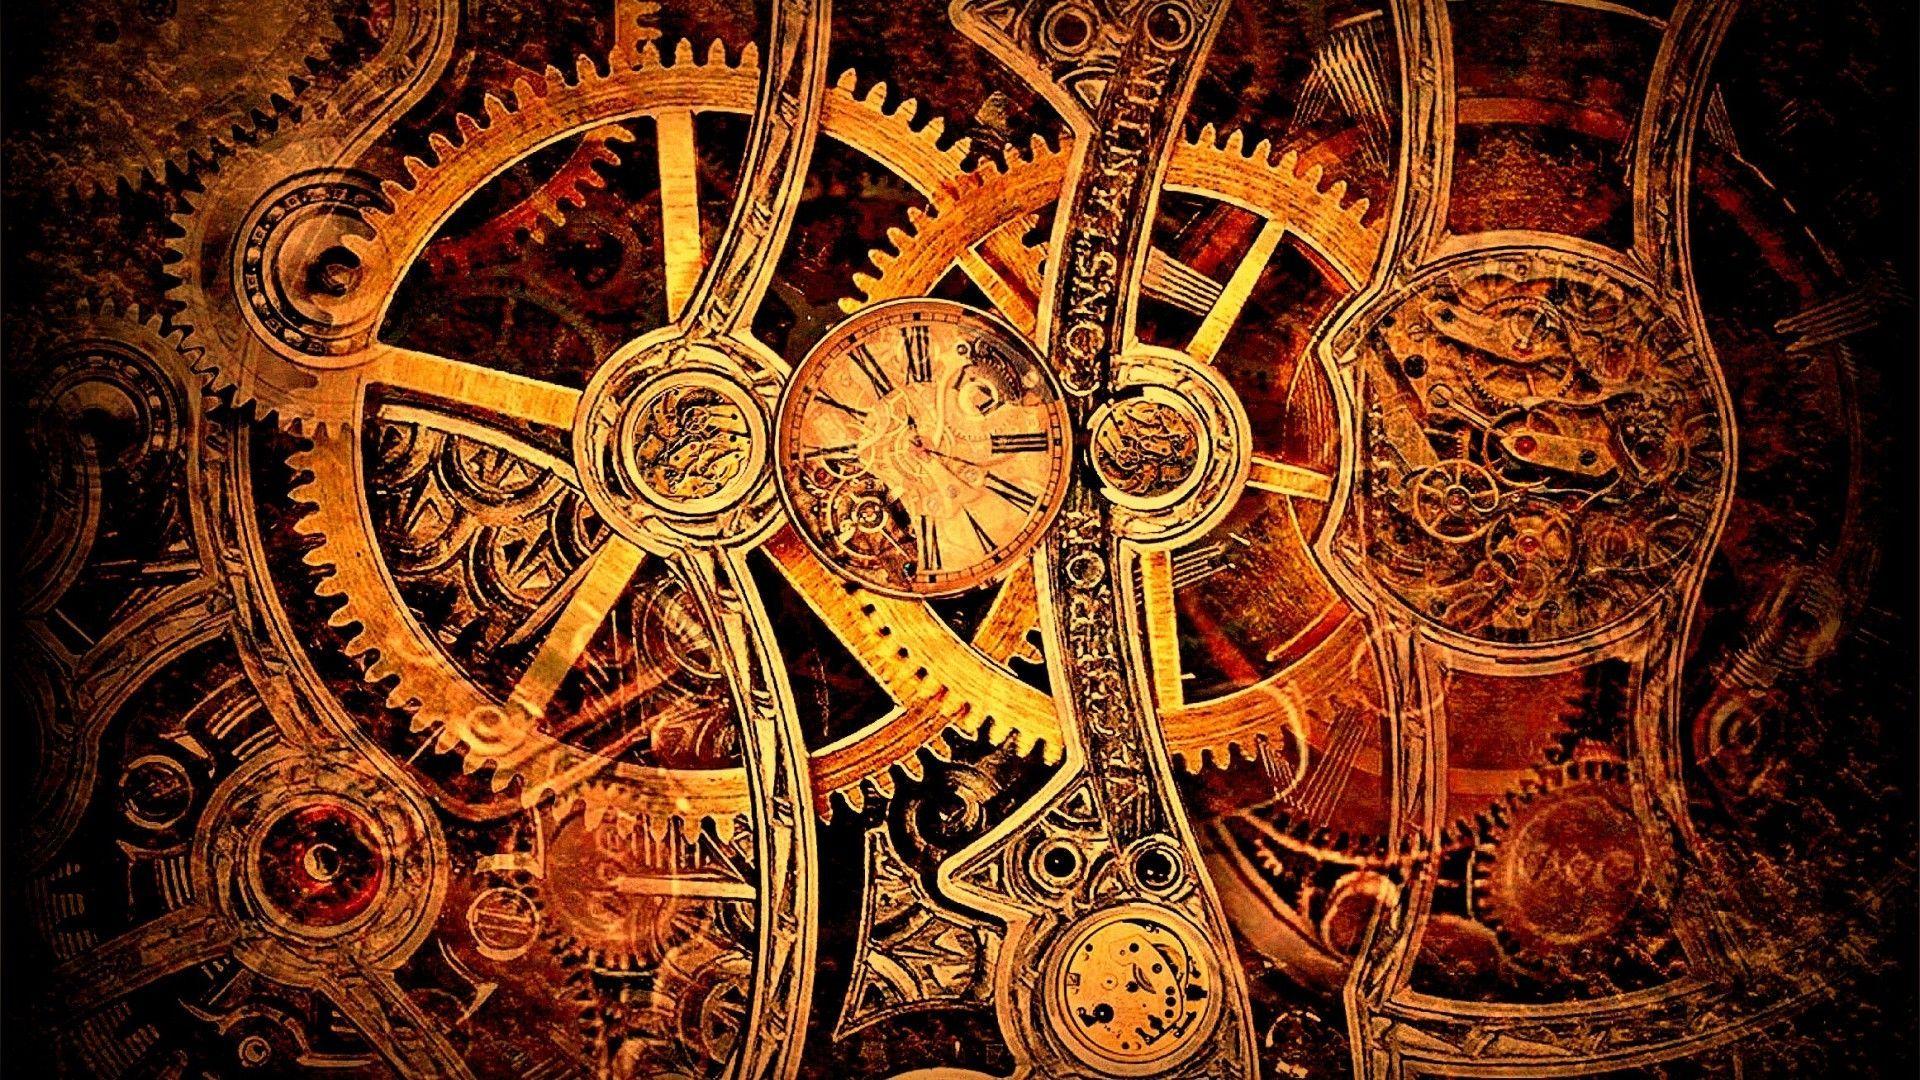 The clockwork is a complex system of gears and cogs - Steampunk